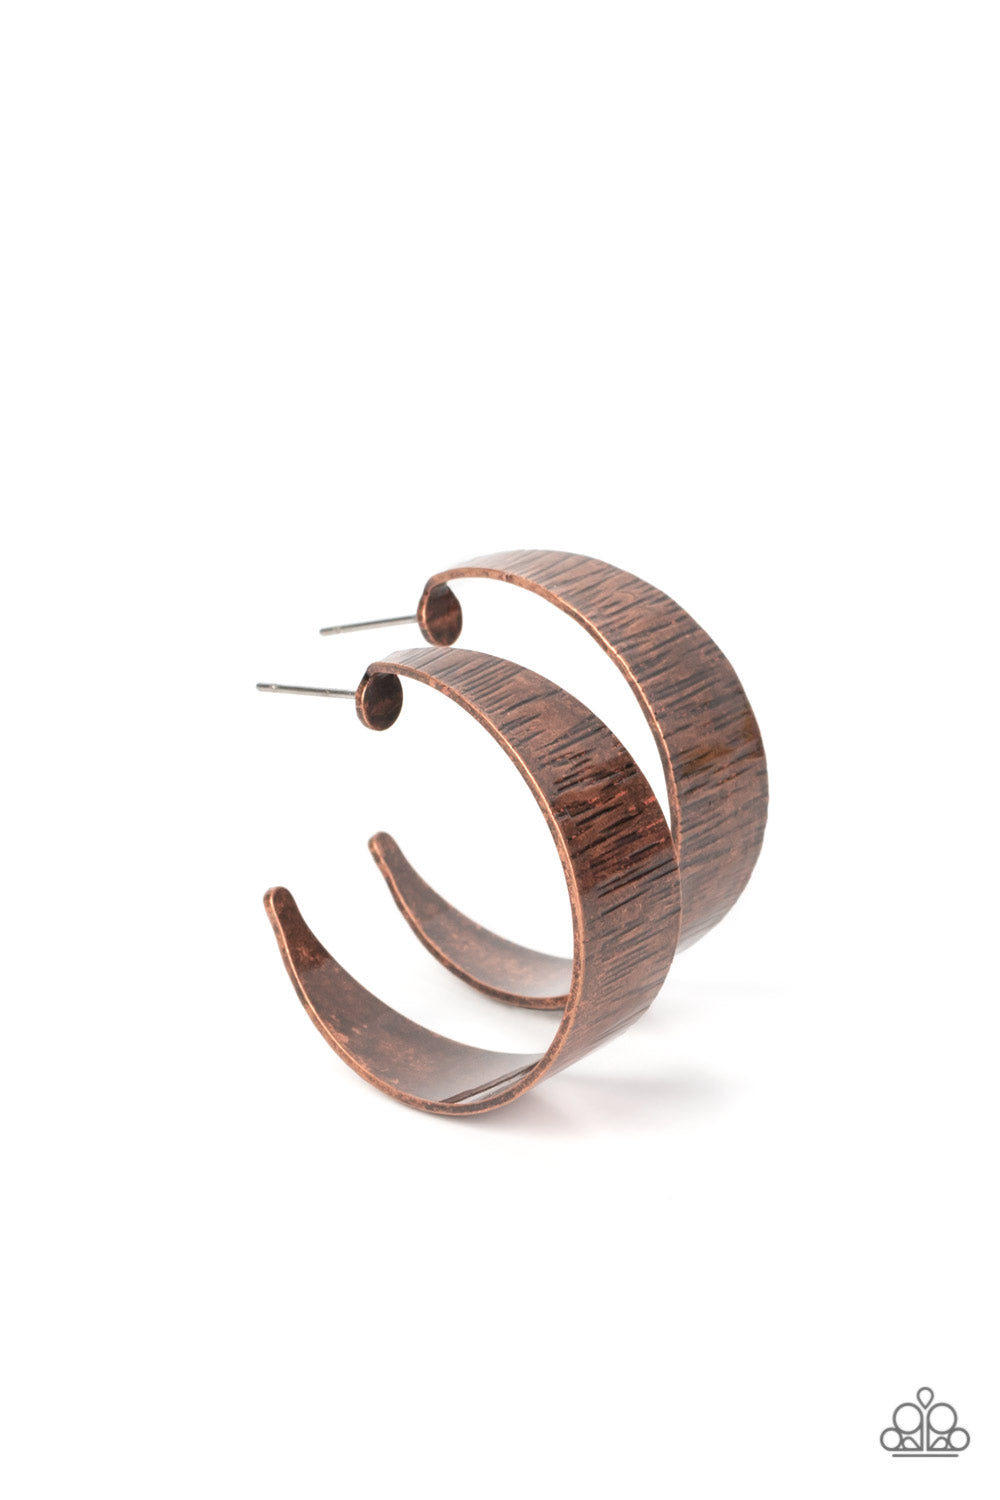 Lecture on Texture - Copper Hoop Earring